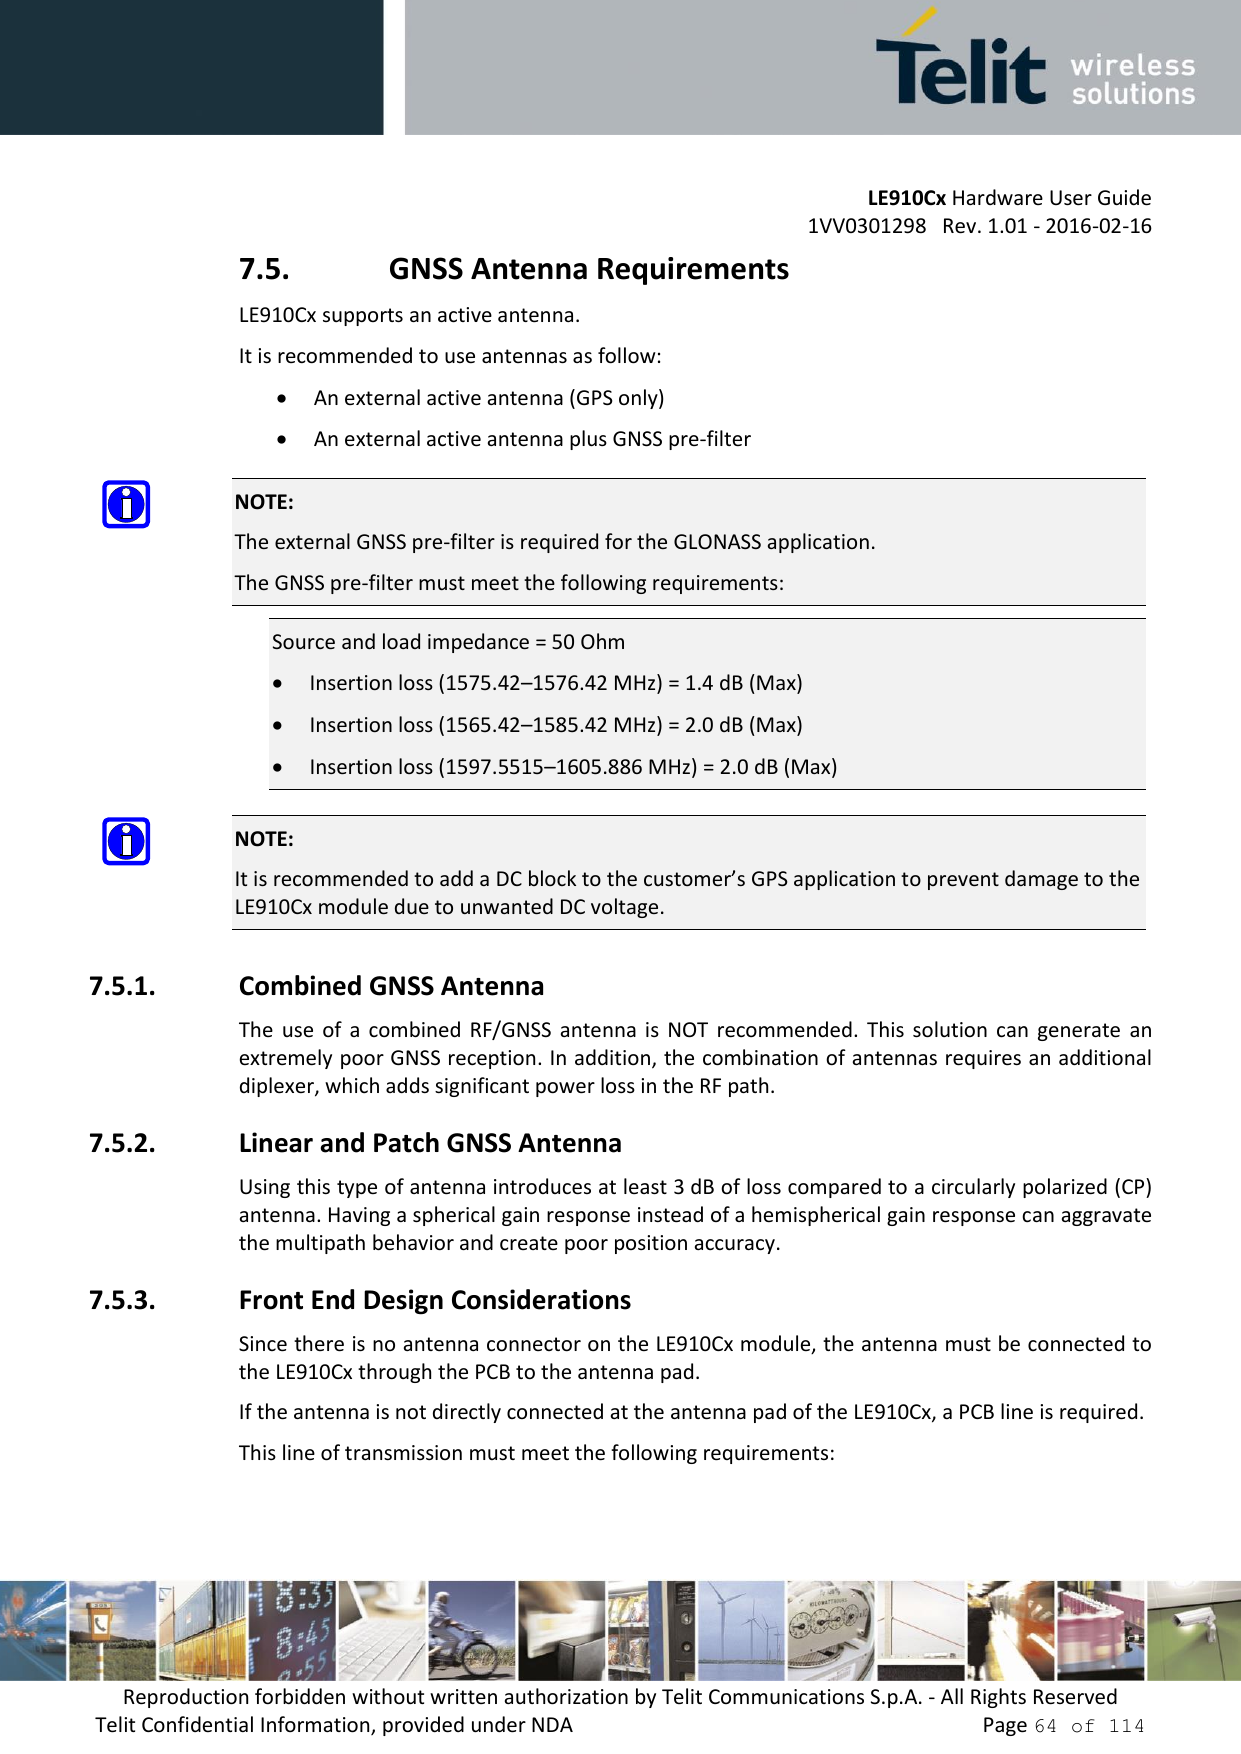         LE910Cx Hardware User Guide     1VV0301298   Rev. 1.01 - 2016-02-16 Reproduction forbidden without written authorization by Telit Communications S.p.A. - All Rights Reserved Telit Confidential Information, provided under NDA                 Page 64 of 114 7.5. GNSS Antenna Requirements LE910Cx supports an active antenna. It is recommended to use antennas as follow:  An external active antenna (GPS only)  An external active antenna plus GNSS pre-filter  NOTE: The external GNSS pre-filter is required for the GLONASS application. The GNSS pre-filter must meet the following requirements: Source and load impedance = 50 Ohm  Insertion loss (1575.42–1576.42 MHz) = 1.4 dB (Max)  Insertion loss (1565.42–1585.42 MHz) = 2.0 dB (Max)  Insertion loss (1597.5515–1605.886 MHz) = 2.0 dB (Max)  NOTE: It is recommended to add a DC block to the customer’s GPS application to prevent damage to the LE910Cx module due to unwanted DC voltage. 7.5.1. Combined GNSS Antenna The  use  of  a  combined  RF/GNSS  antenna  is  NOT  recommended.  This  solution can  generate  an extremely poor GNSS reception. In addition, the combination of antennas requires an additional diplexer, which adds significant power loss in the RF path. 7.5.2. Linear and Patch GNSS Antenna Using this type of antenna introduces at least 3 dB of loss compared to a circularly polarized (CP) antenna. Having a spherical gain response instead of a hemispherical gain response can aggravate the multipath behavior and create poor position accuracy. 7.5.3. Front End Design Considerations Since there is no antenna connector on the LE910Cx module, the antenna must be connected to the LE910Cx through the PCB to the antenna pad.  If the antenna is not directly connected at the antenna pad of the LE910Cx, a PCB line is required. This line of transmission must meet the following requirements: 